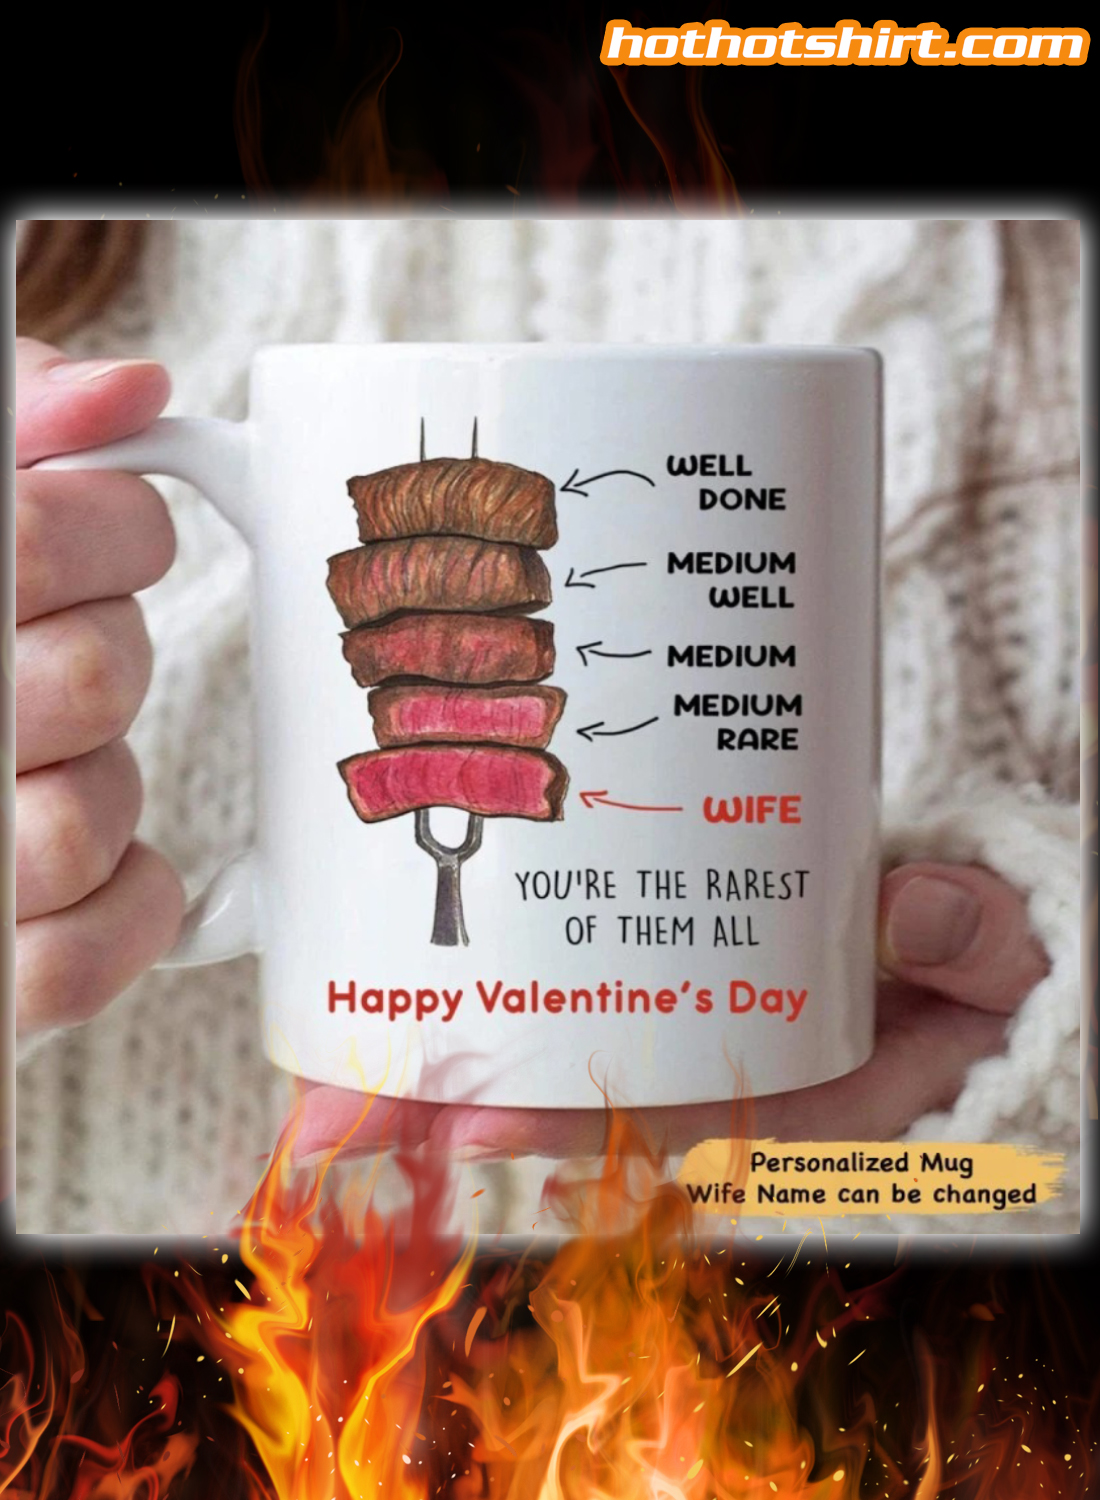 Personalized wife you're the rarest of them all happy valentine's day mug 1